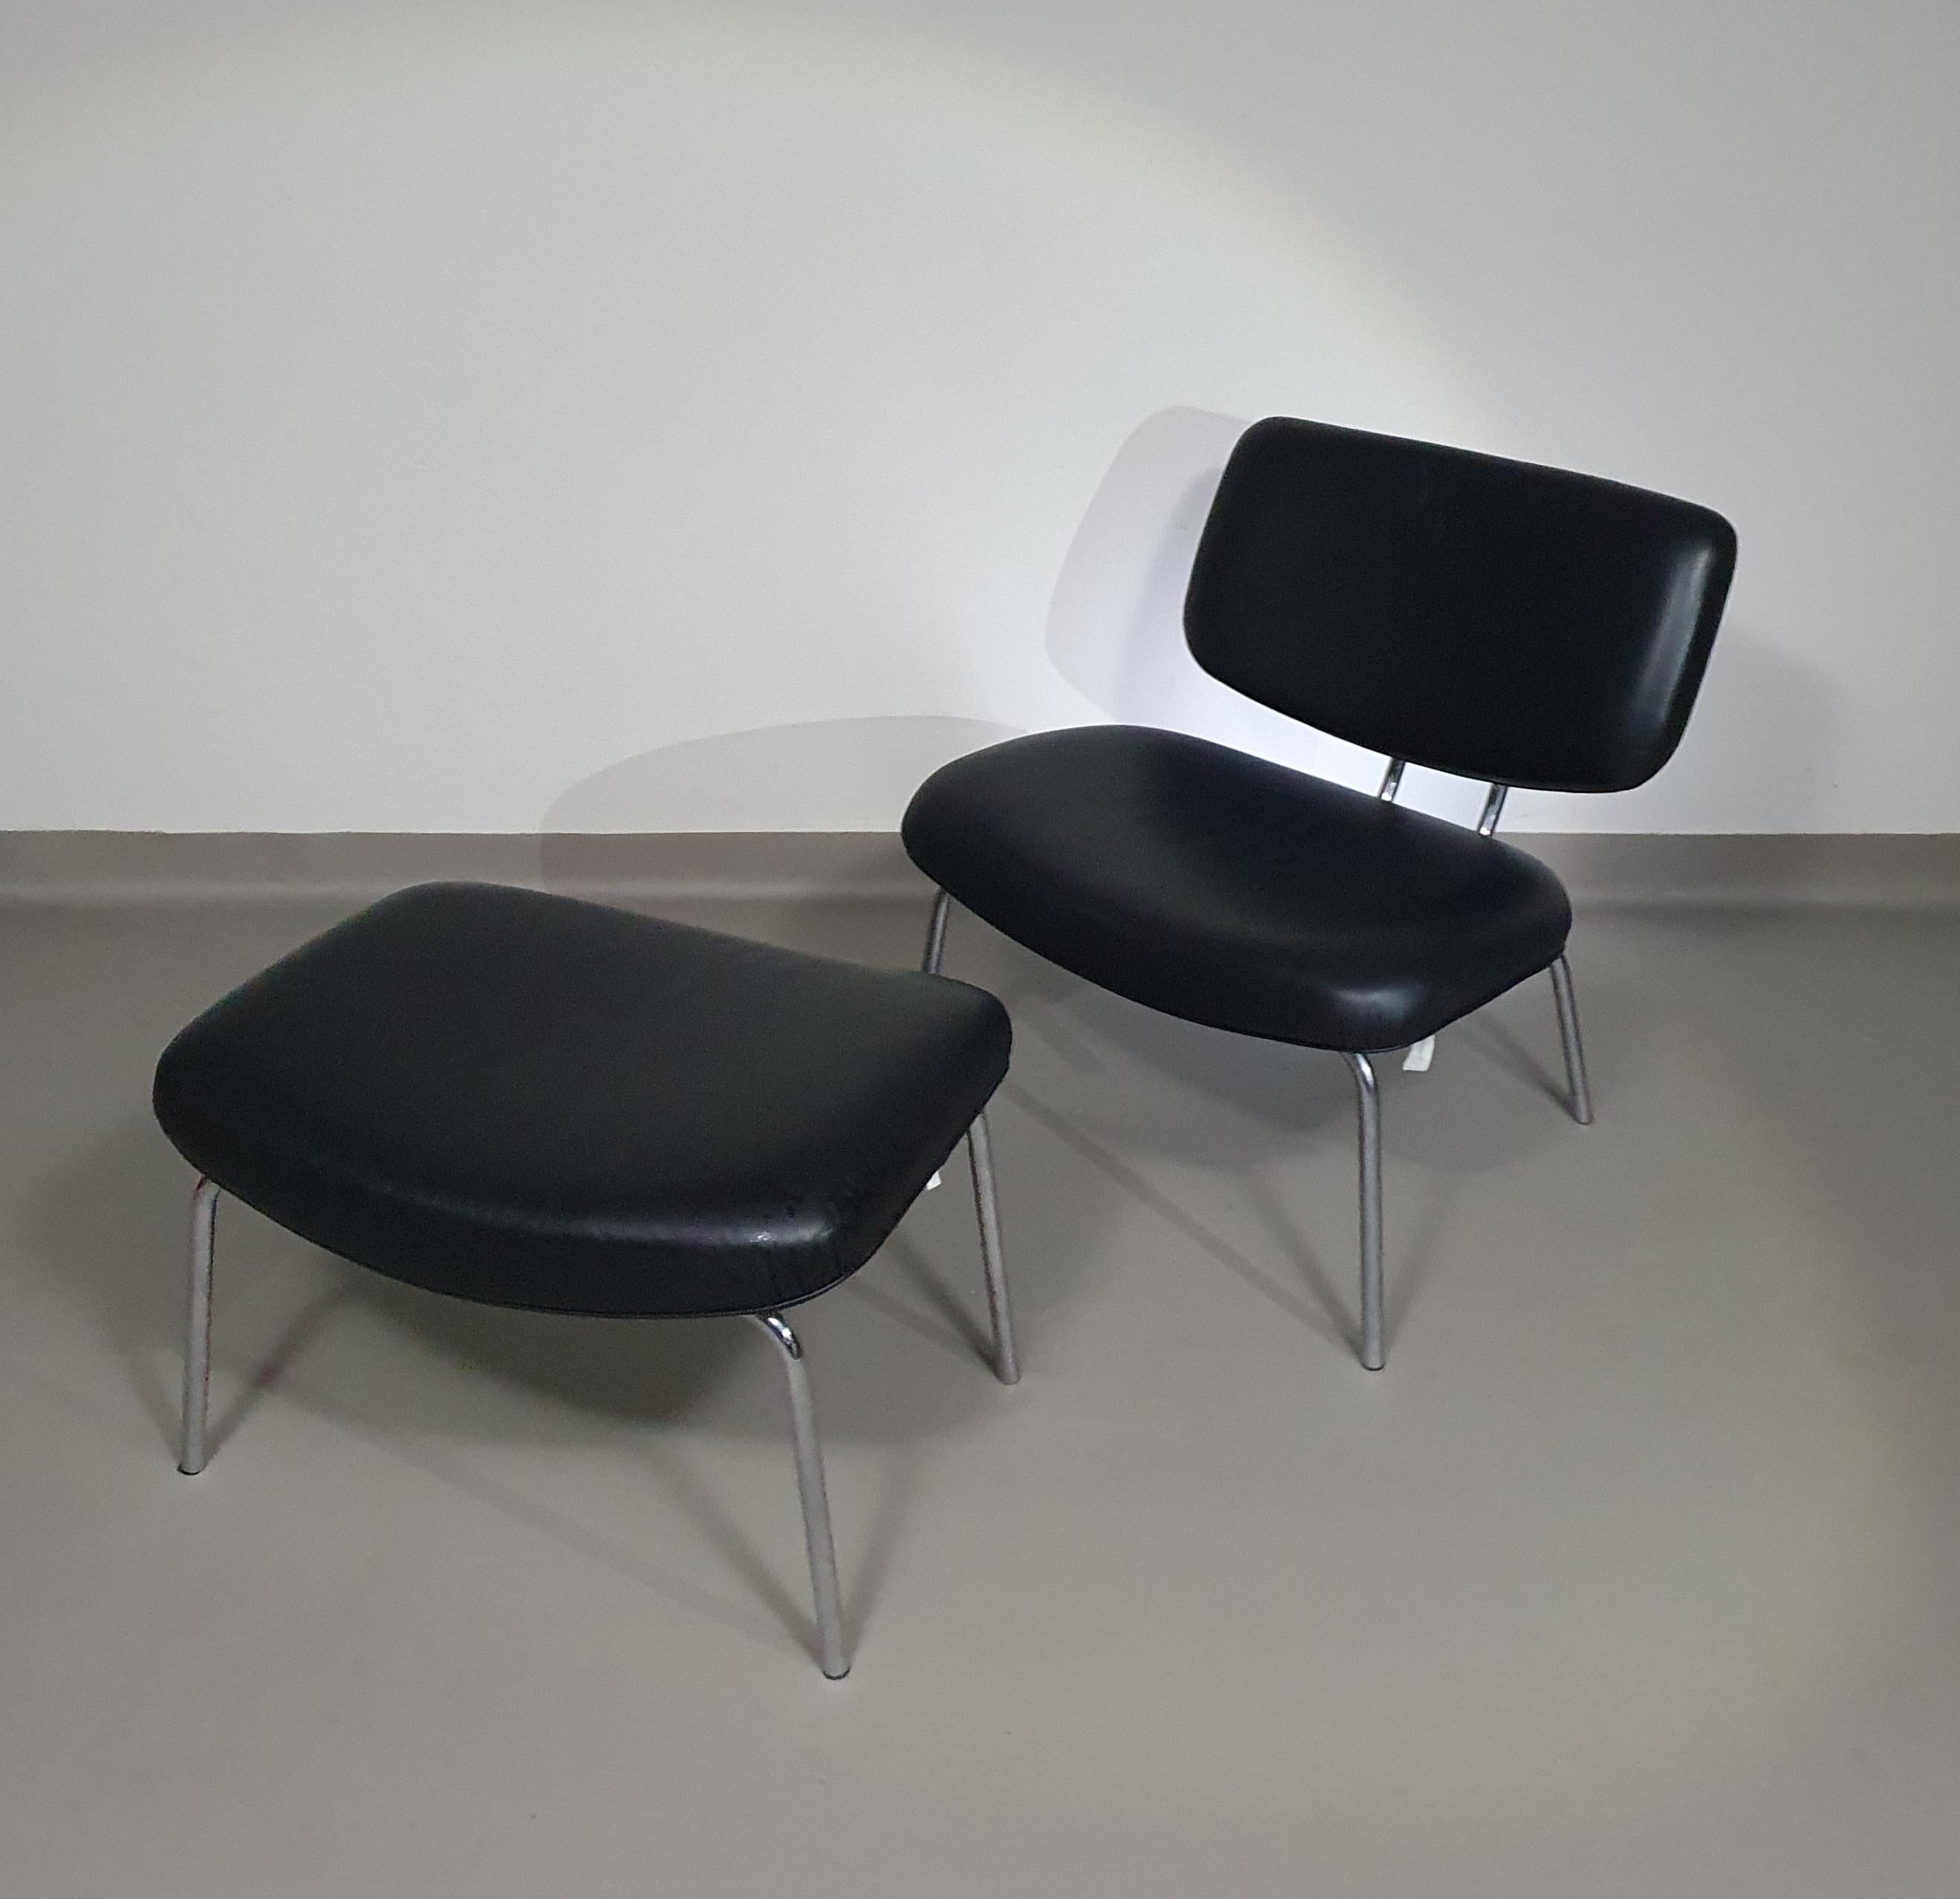 Rare Zanotta Clea lounge chair / pouf in black leather, 1997 by Kristiina Lassus
Chair: height 78 / width 69 / depth 68 cm
Pouf: Height 43 / width 69 / depth 53 cm
